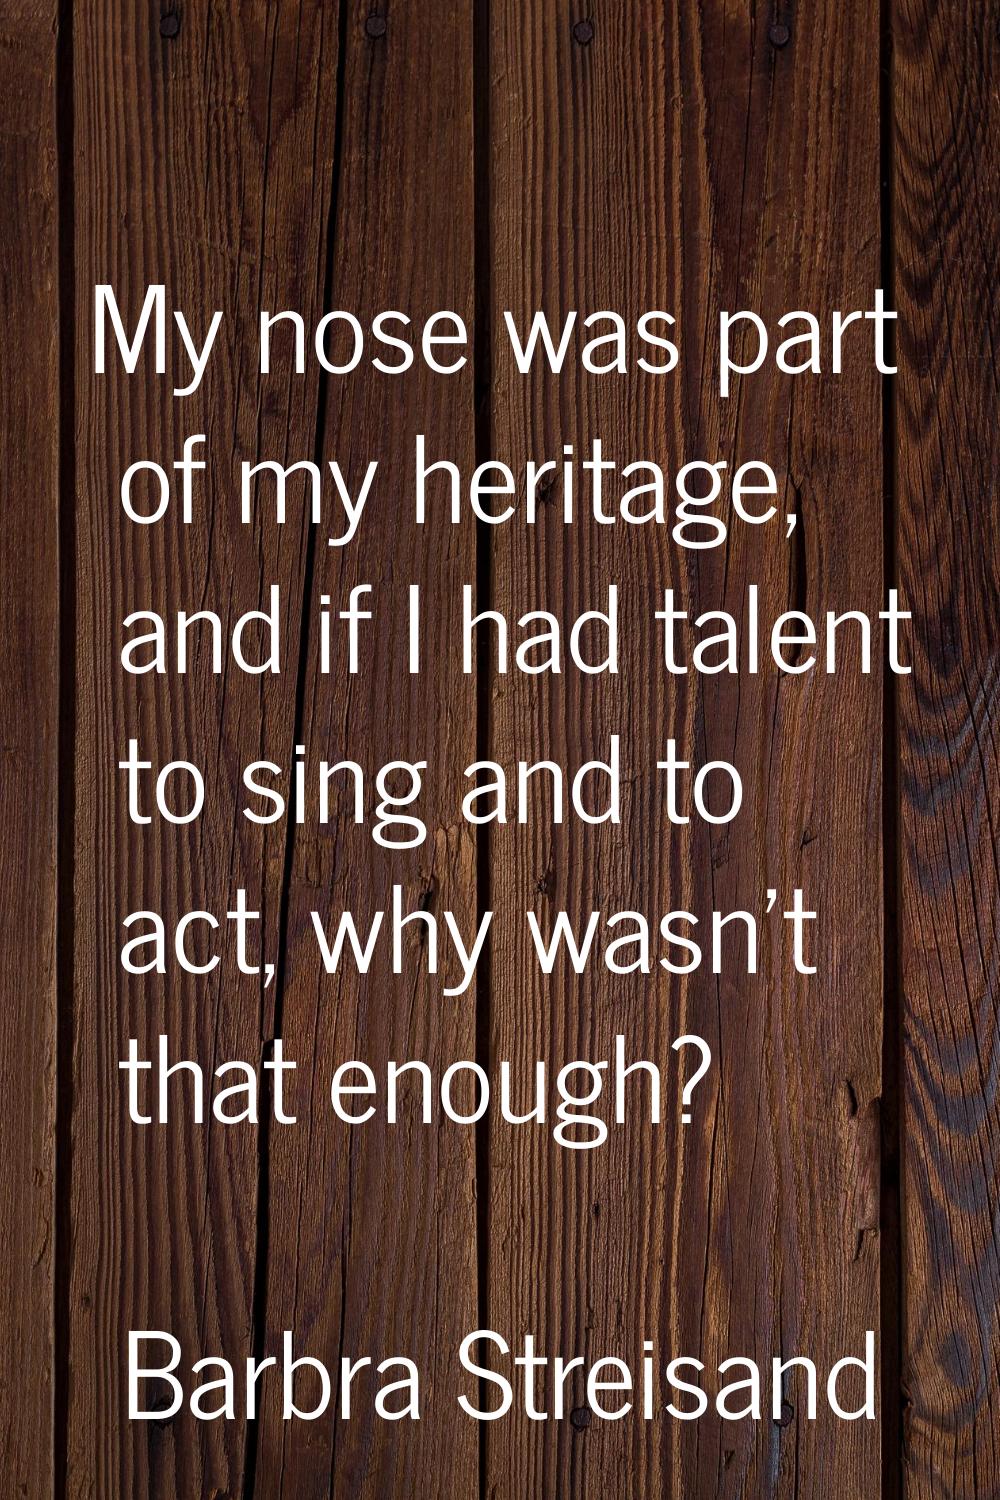 My nose was part of my heritage, and if I had talent to sing and to act, why wasn't that enough?